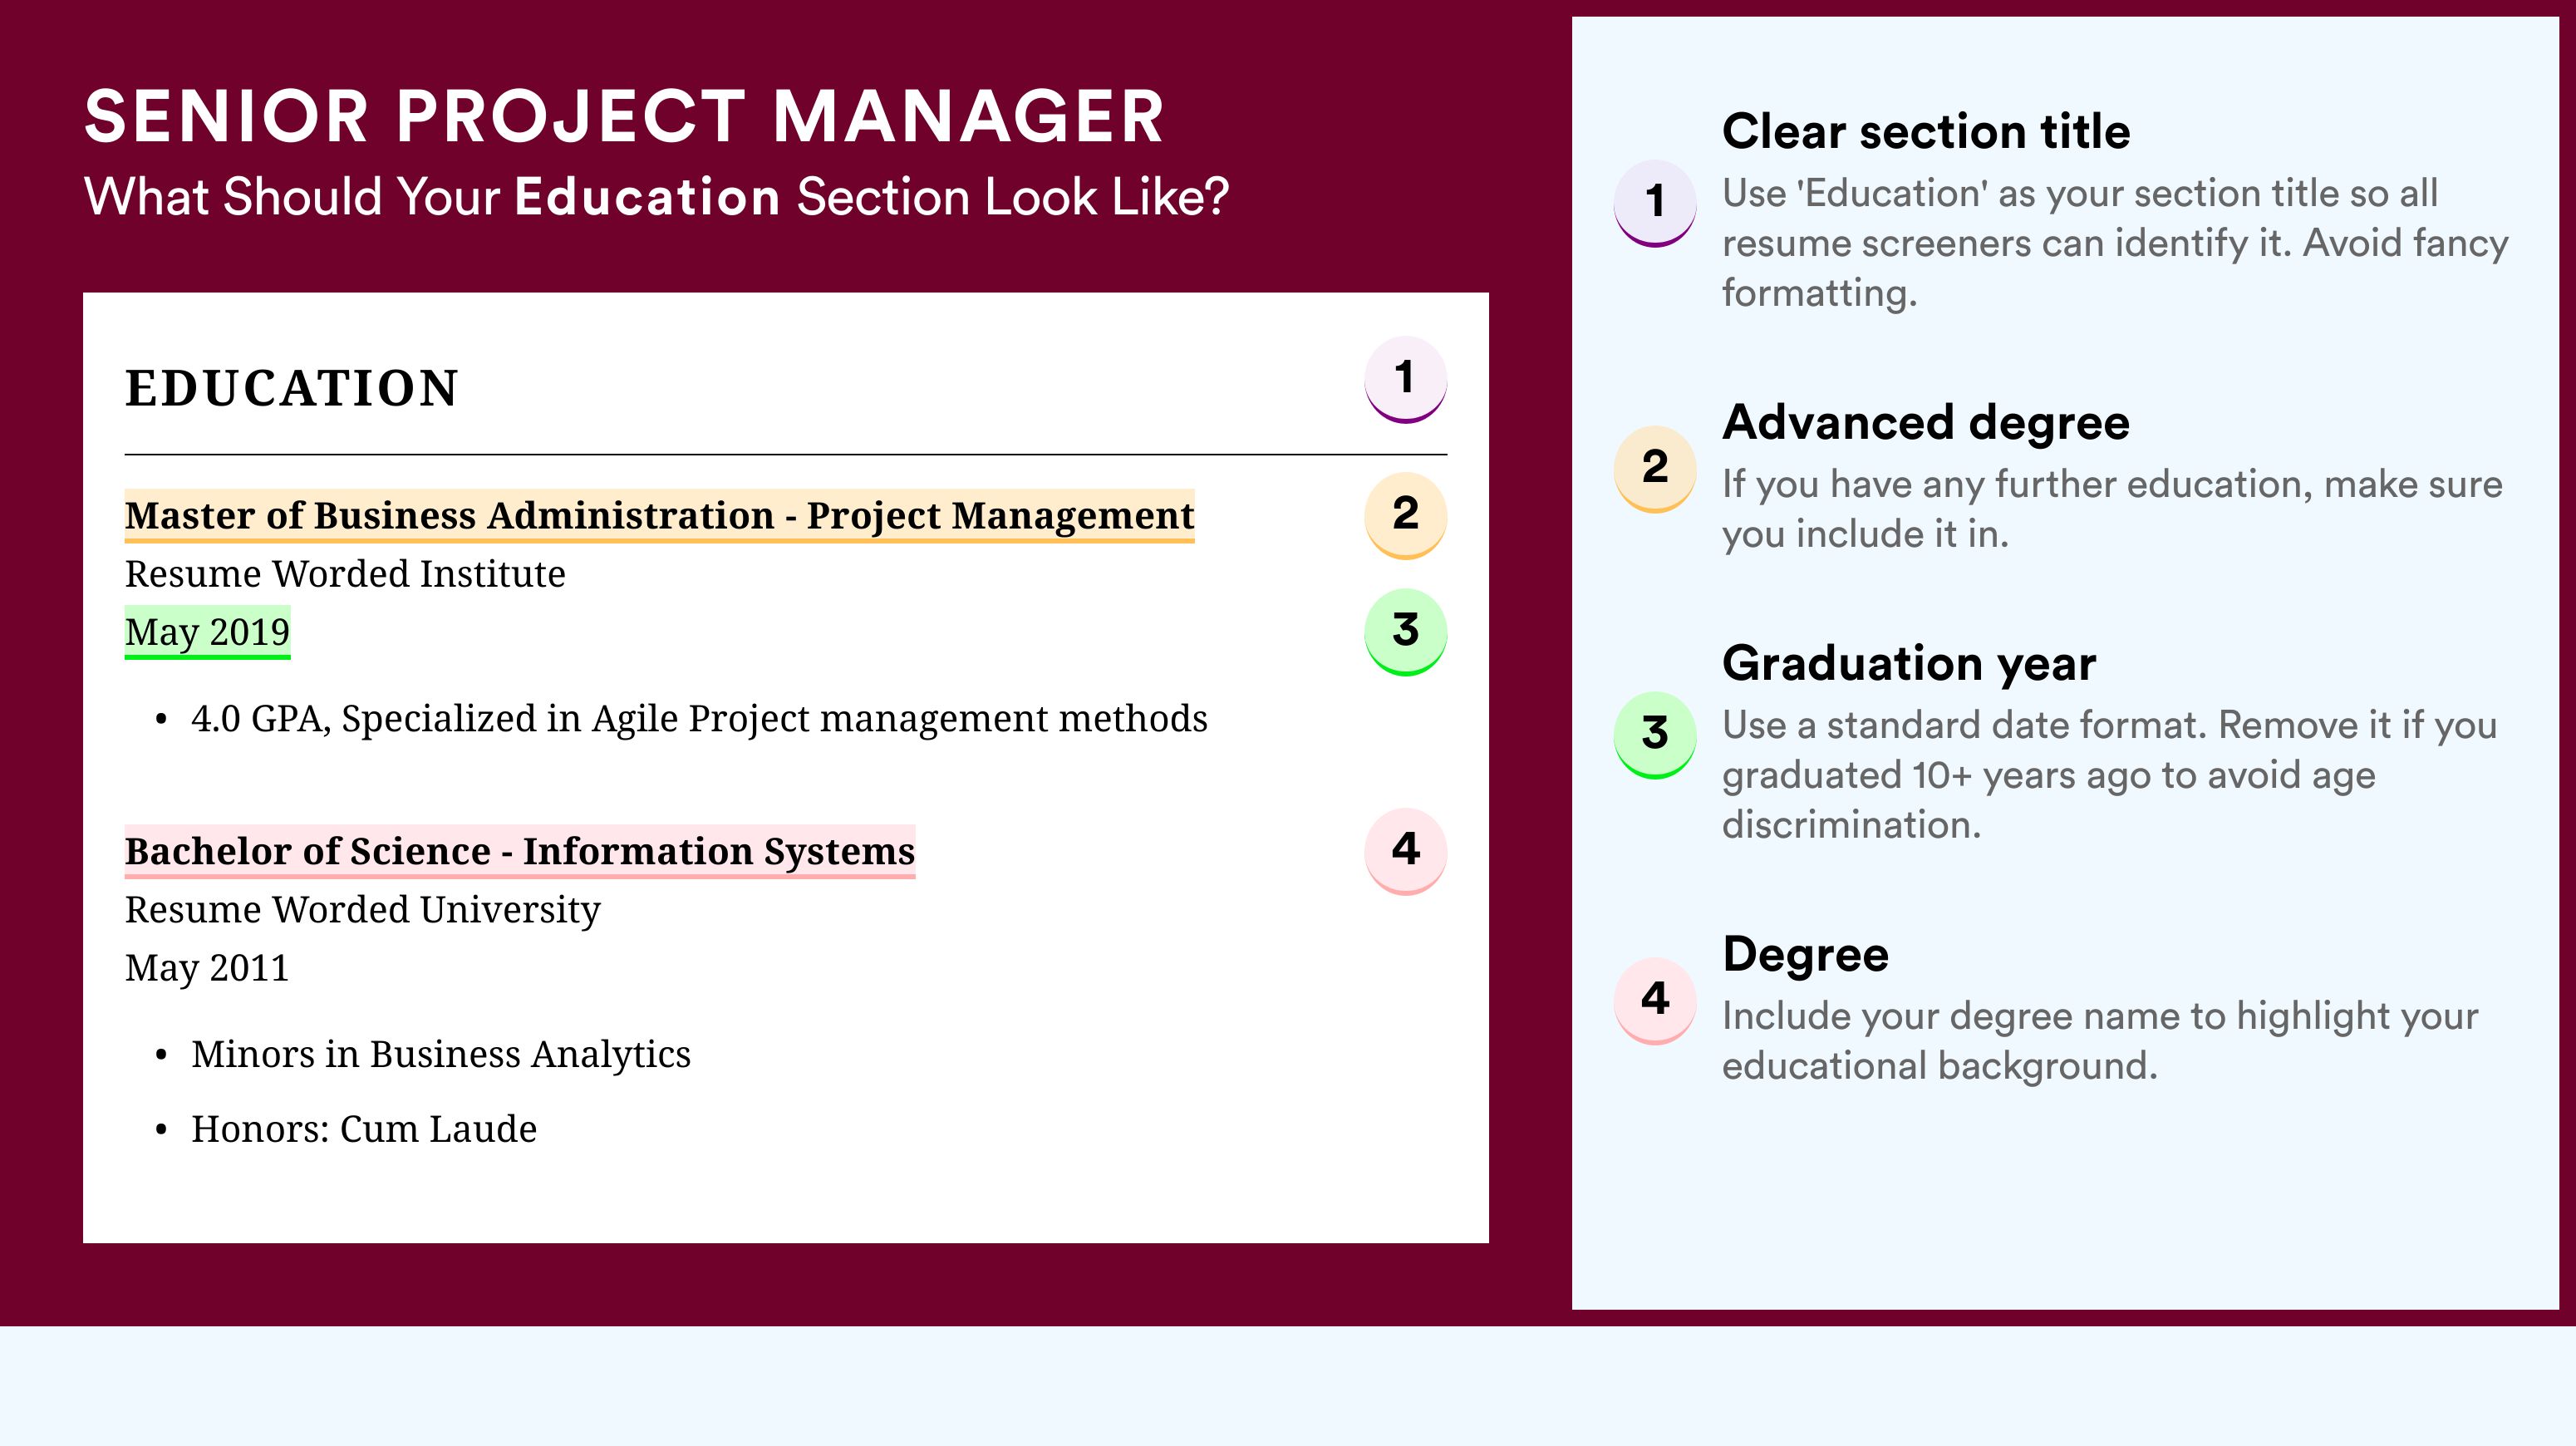 How To Write An Education Section - Senior Project Manager Roles